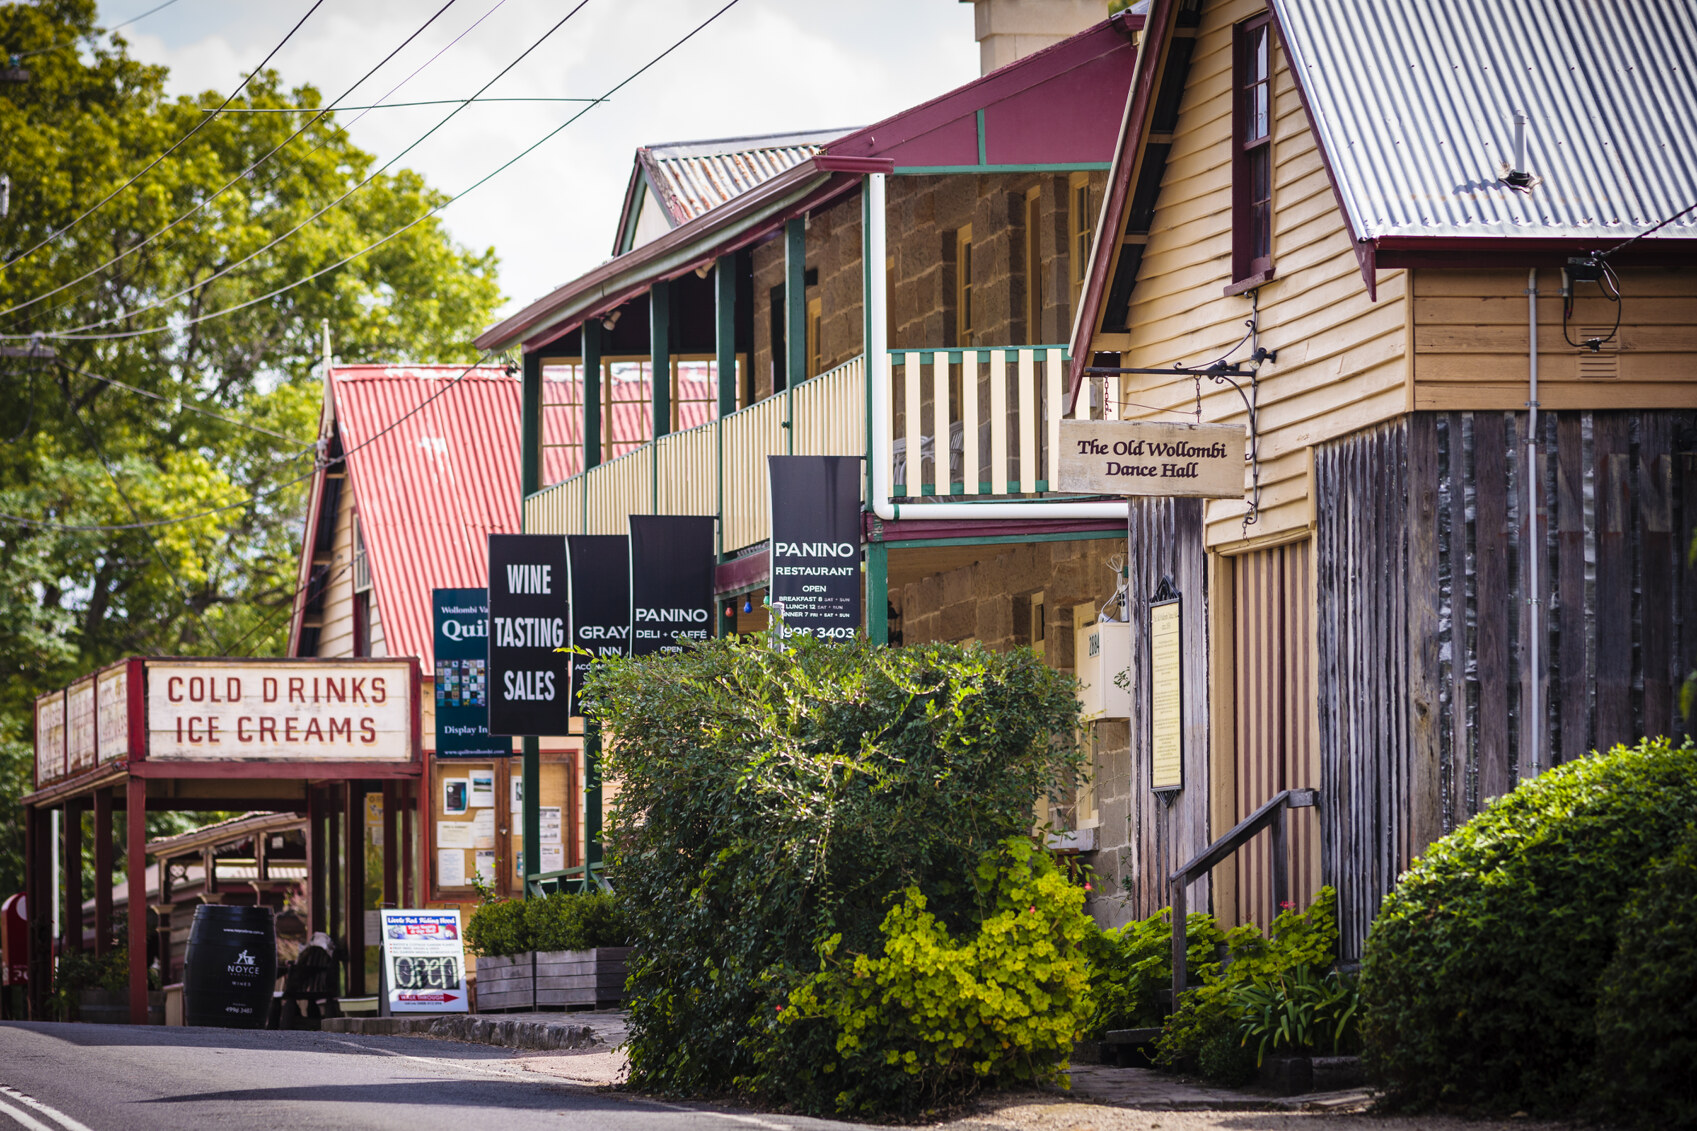 The main street of Wollombi, Cessnock, NSW with its charming historic buildings